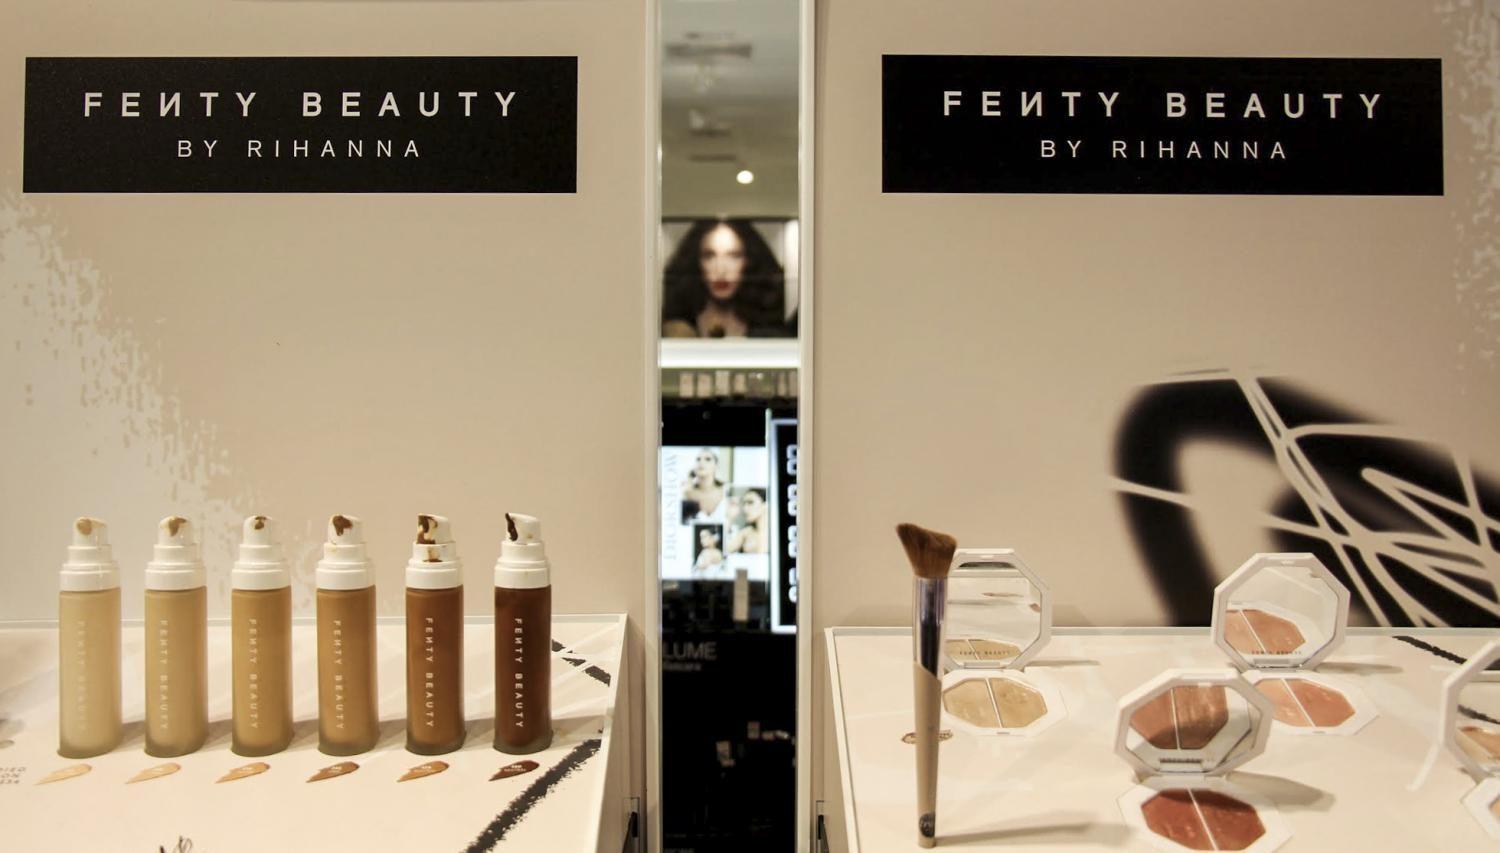 Rihannas+makeup+line+Fenty+carries+a+wide+range+of+products+for+all+skin+colors.